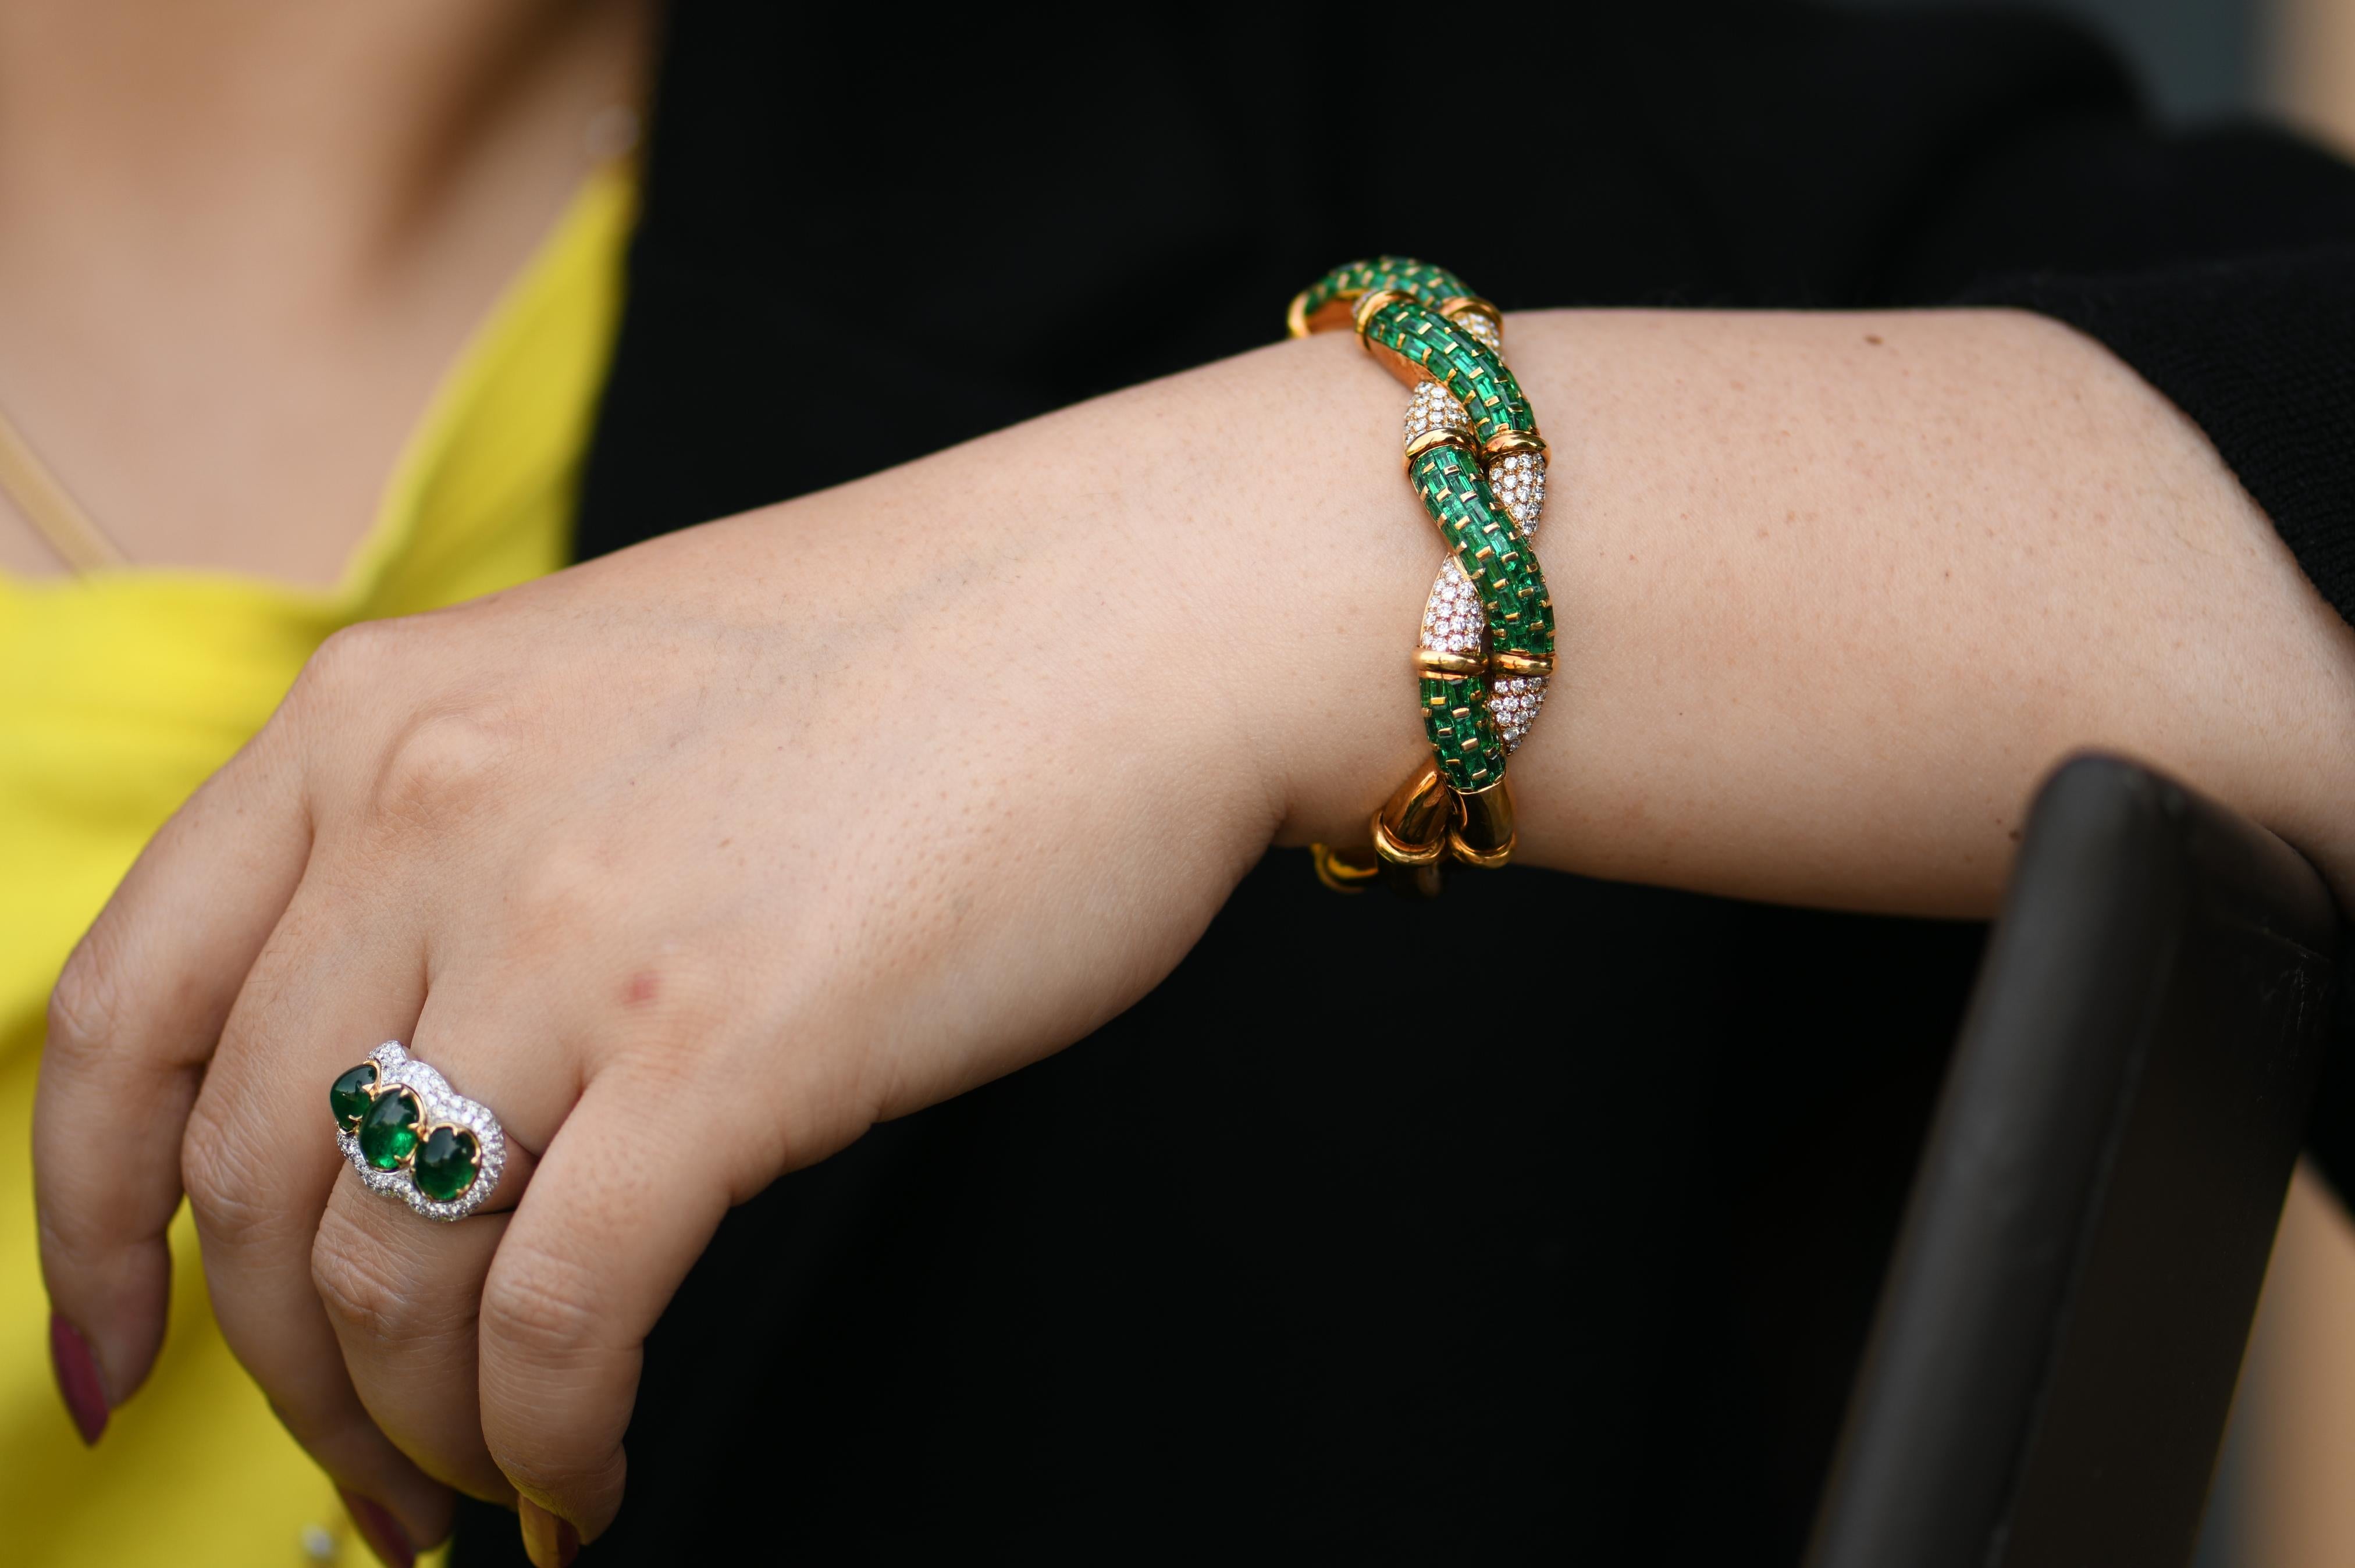 Emeralds are the finest quality, transparent, total weight over 11 carats.
Diamonds total weight approximately 5.8 carats (Estimated D-F colour, VVS clarity)
Marked BOUCHERON, 750 gold mark, ref: 83601423 
The inner bangle dimensions are 56 x